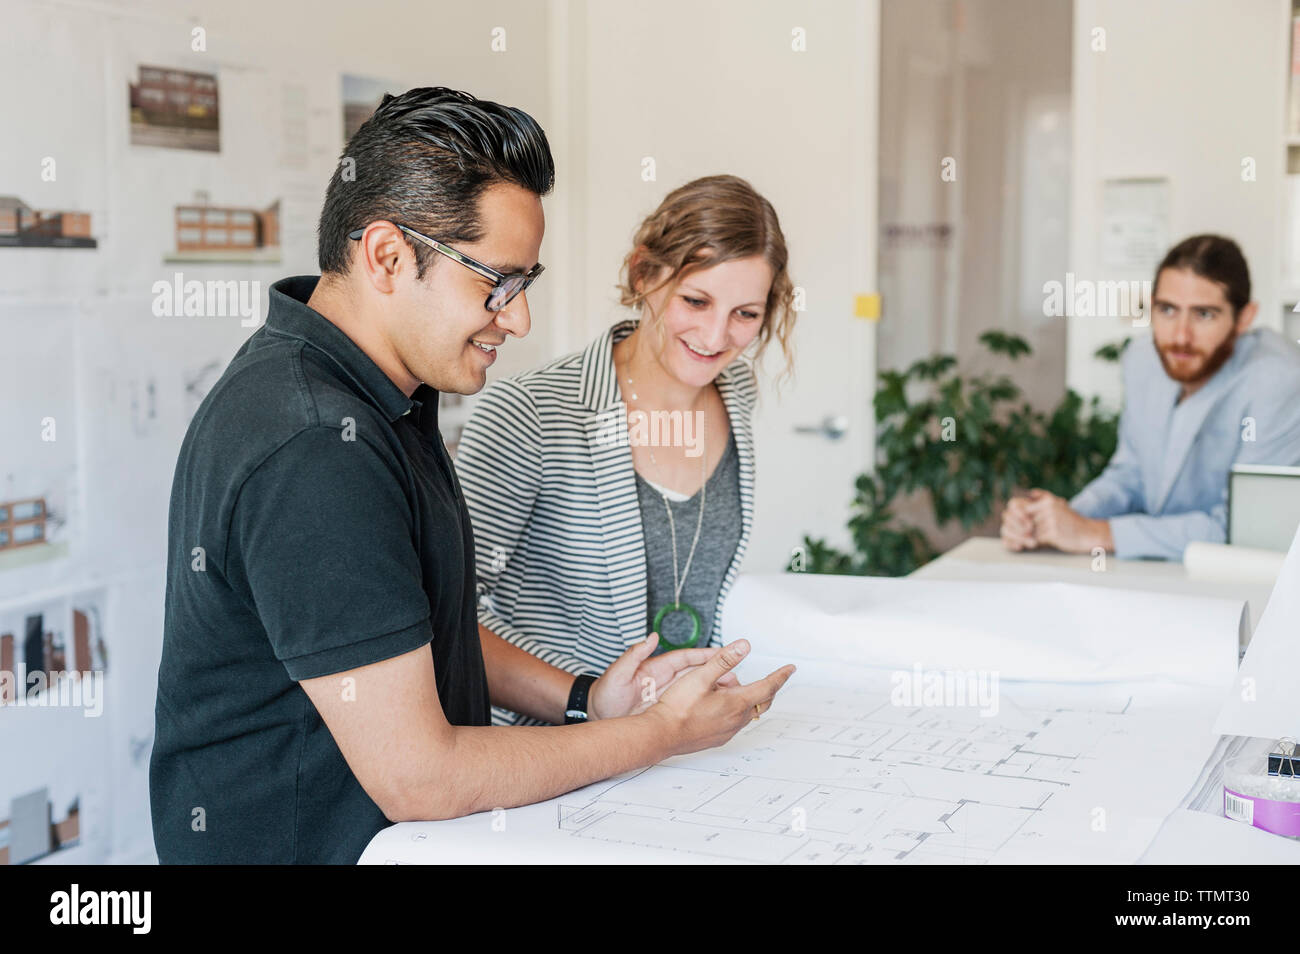 Happy colleagues analyzing blueprints at office Stock Photo